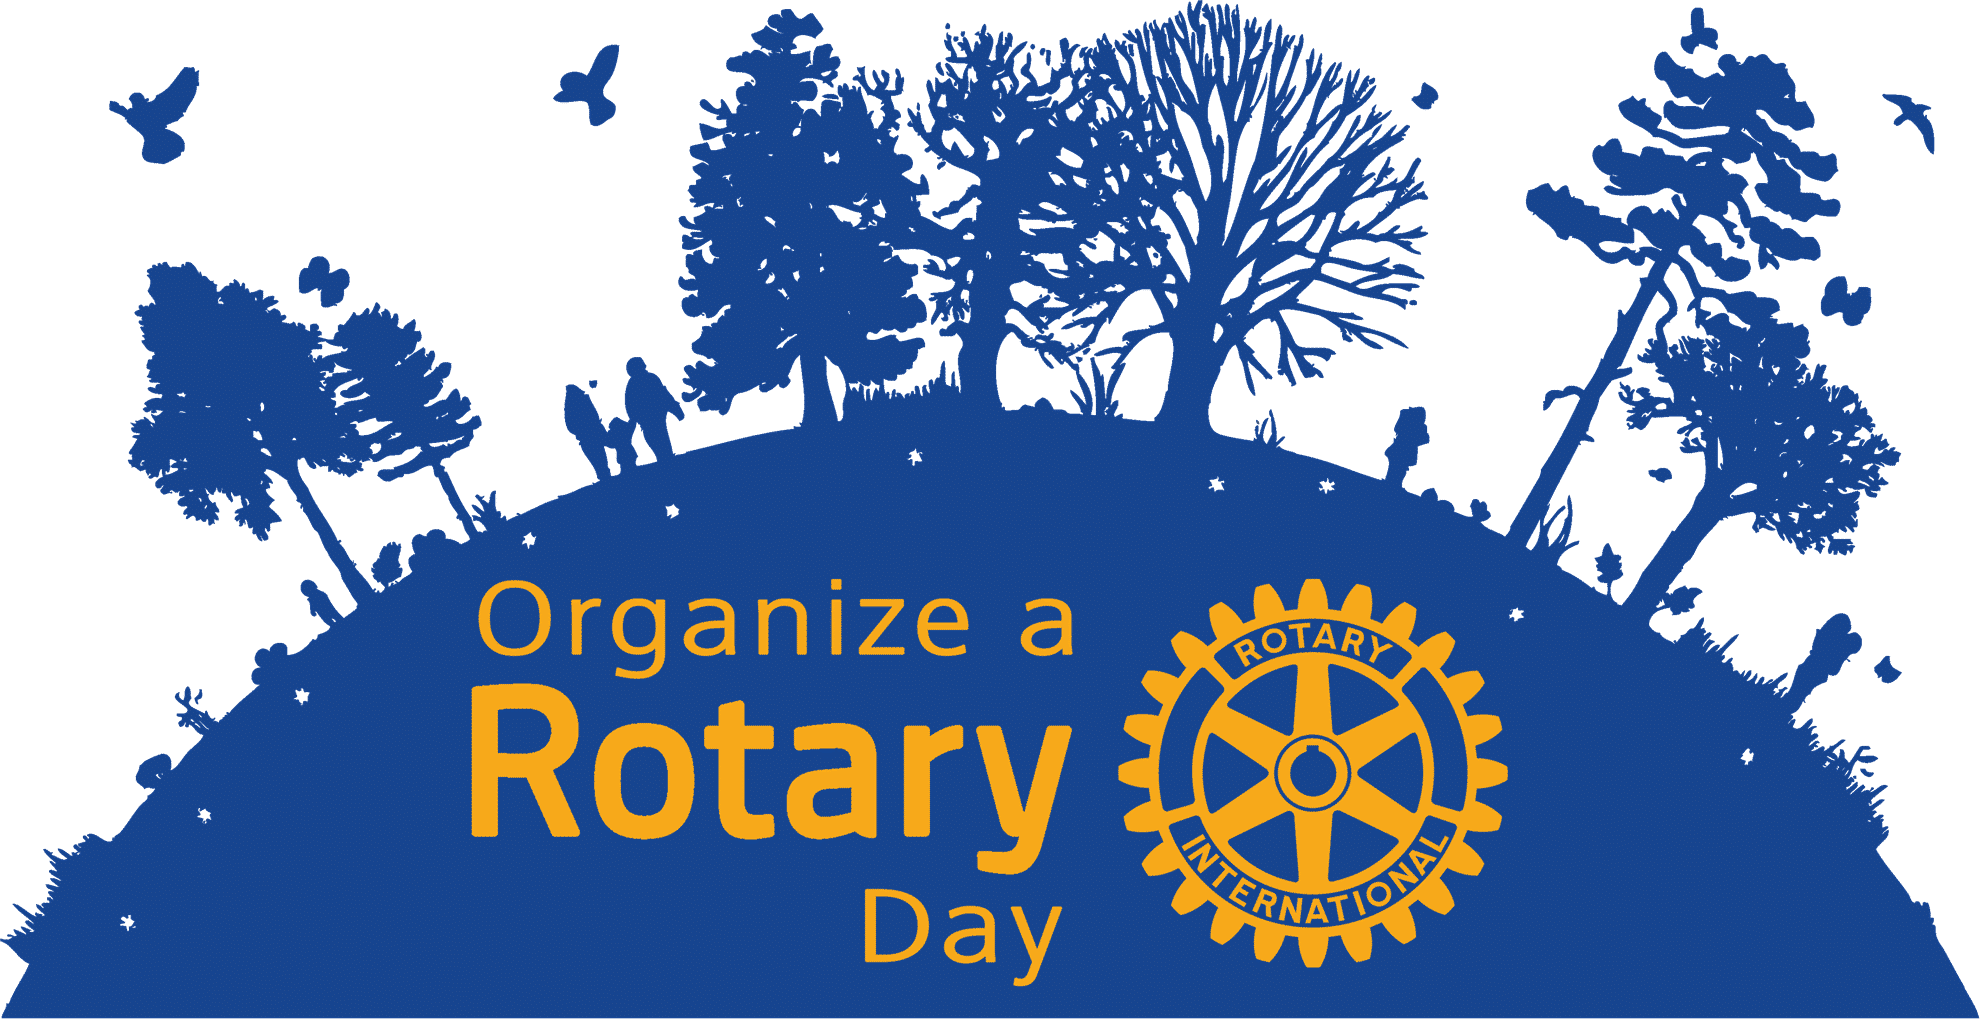 World Rotaract Day celebrates on 13th of March